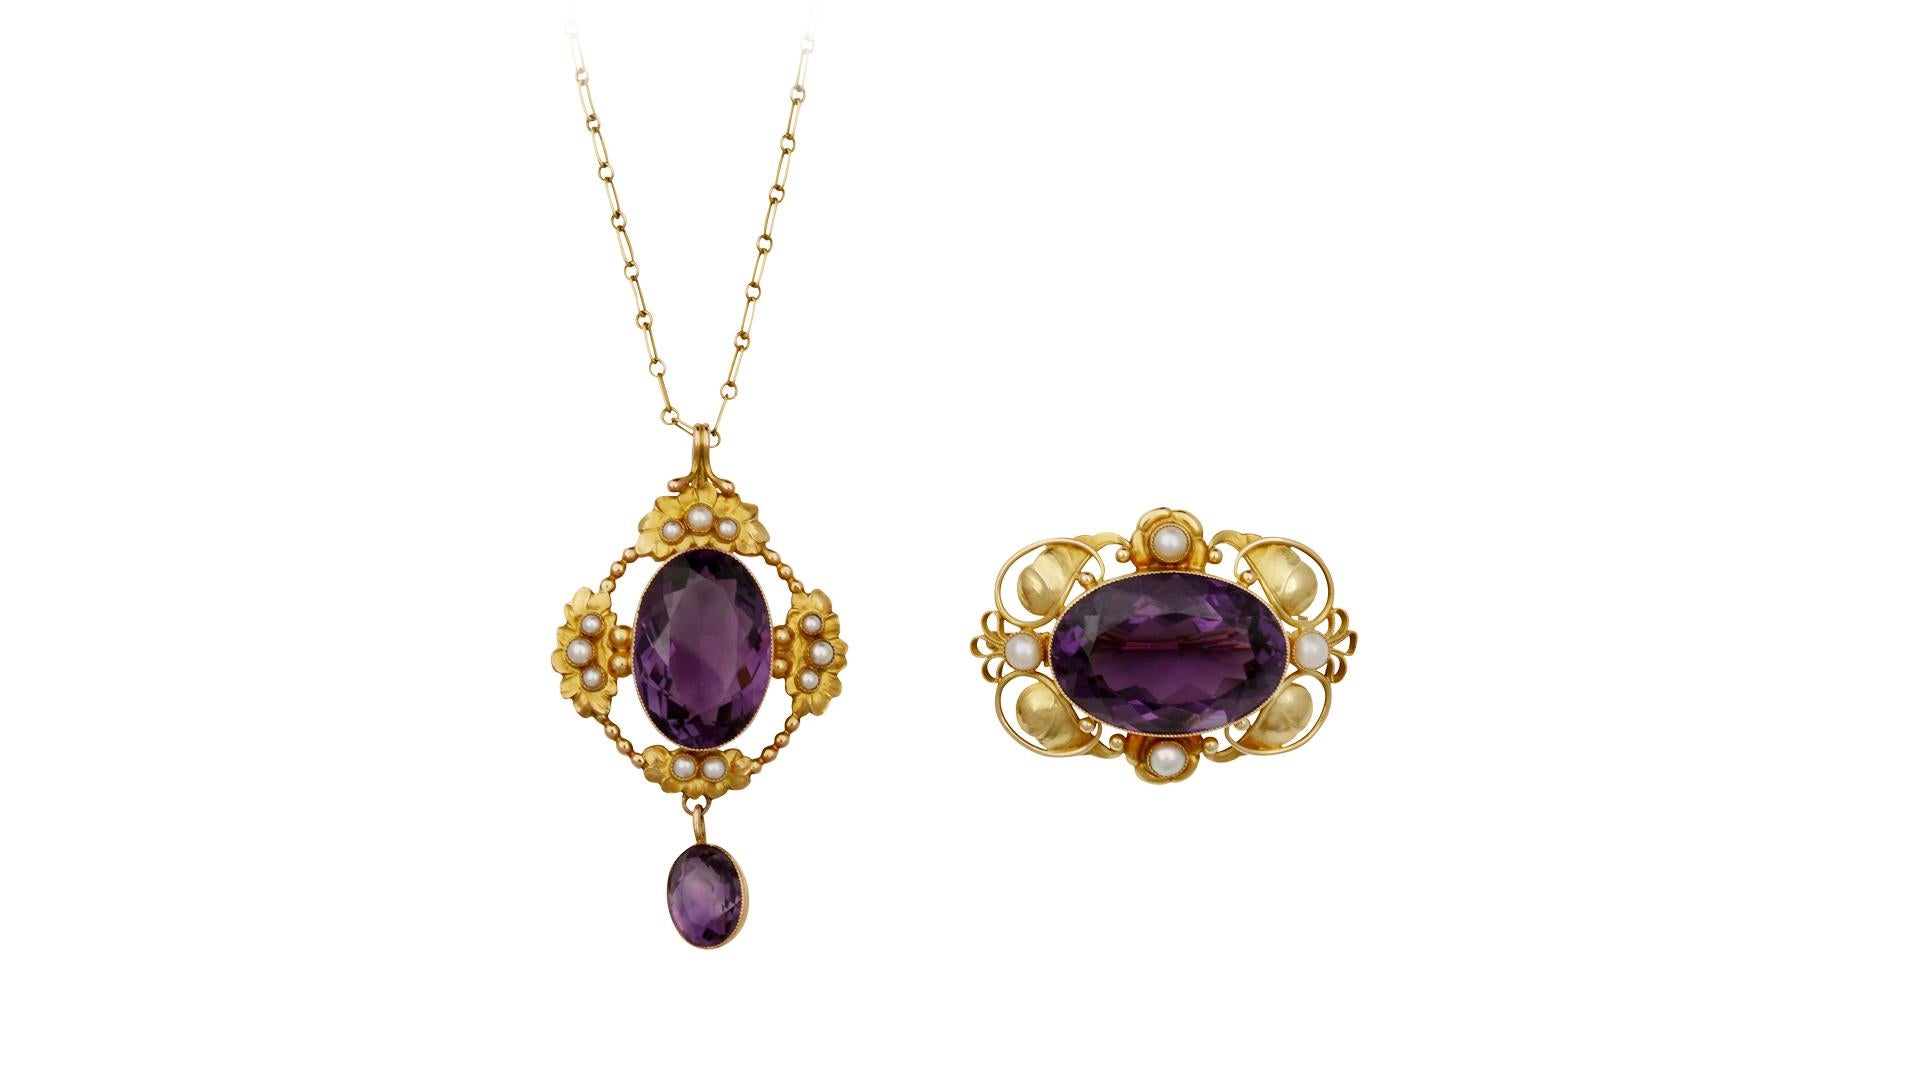 Rare Georg Jensen 18kt gold suite of a matching pendant and brooch, each with a large oval cut amethyst stone and pearls.

Both pieces were bought at the same time presumably between 1945-1952 and come in the original Georg Jensen and Wendel boxes